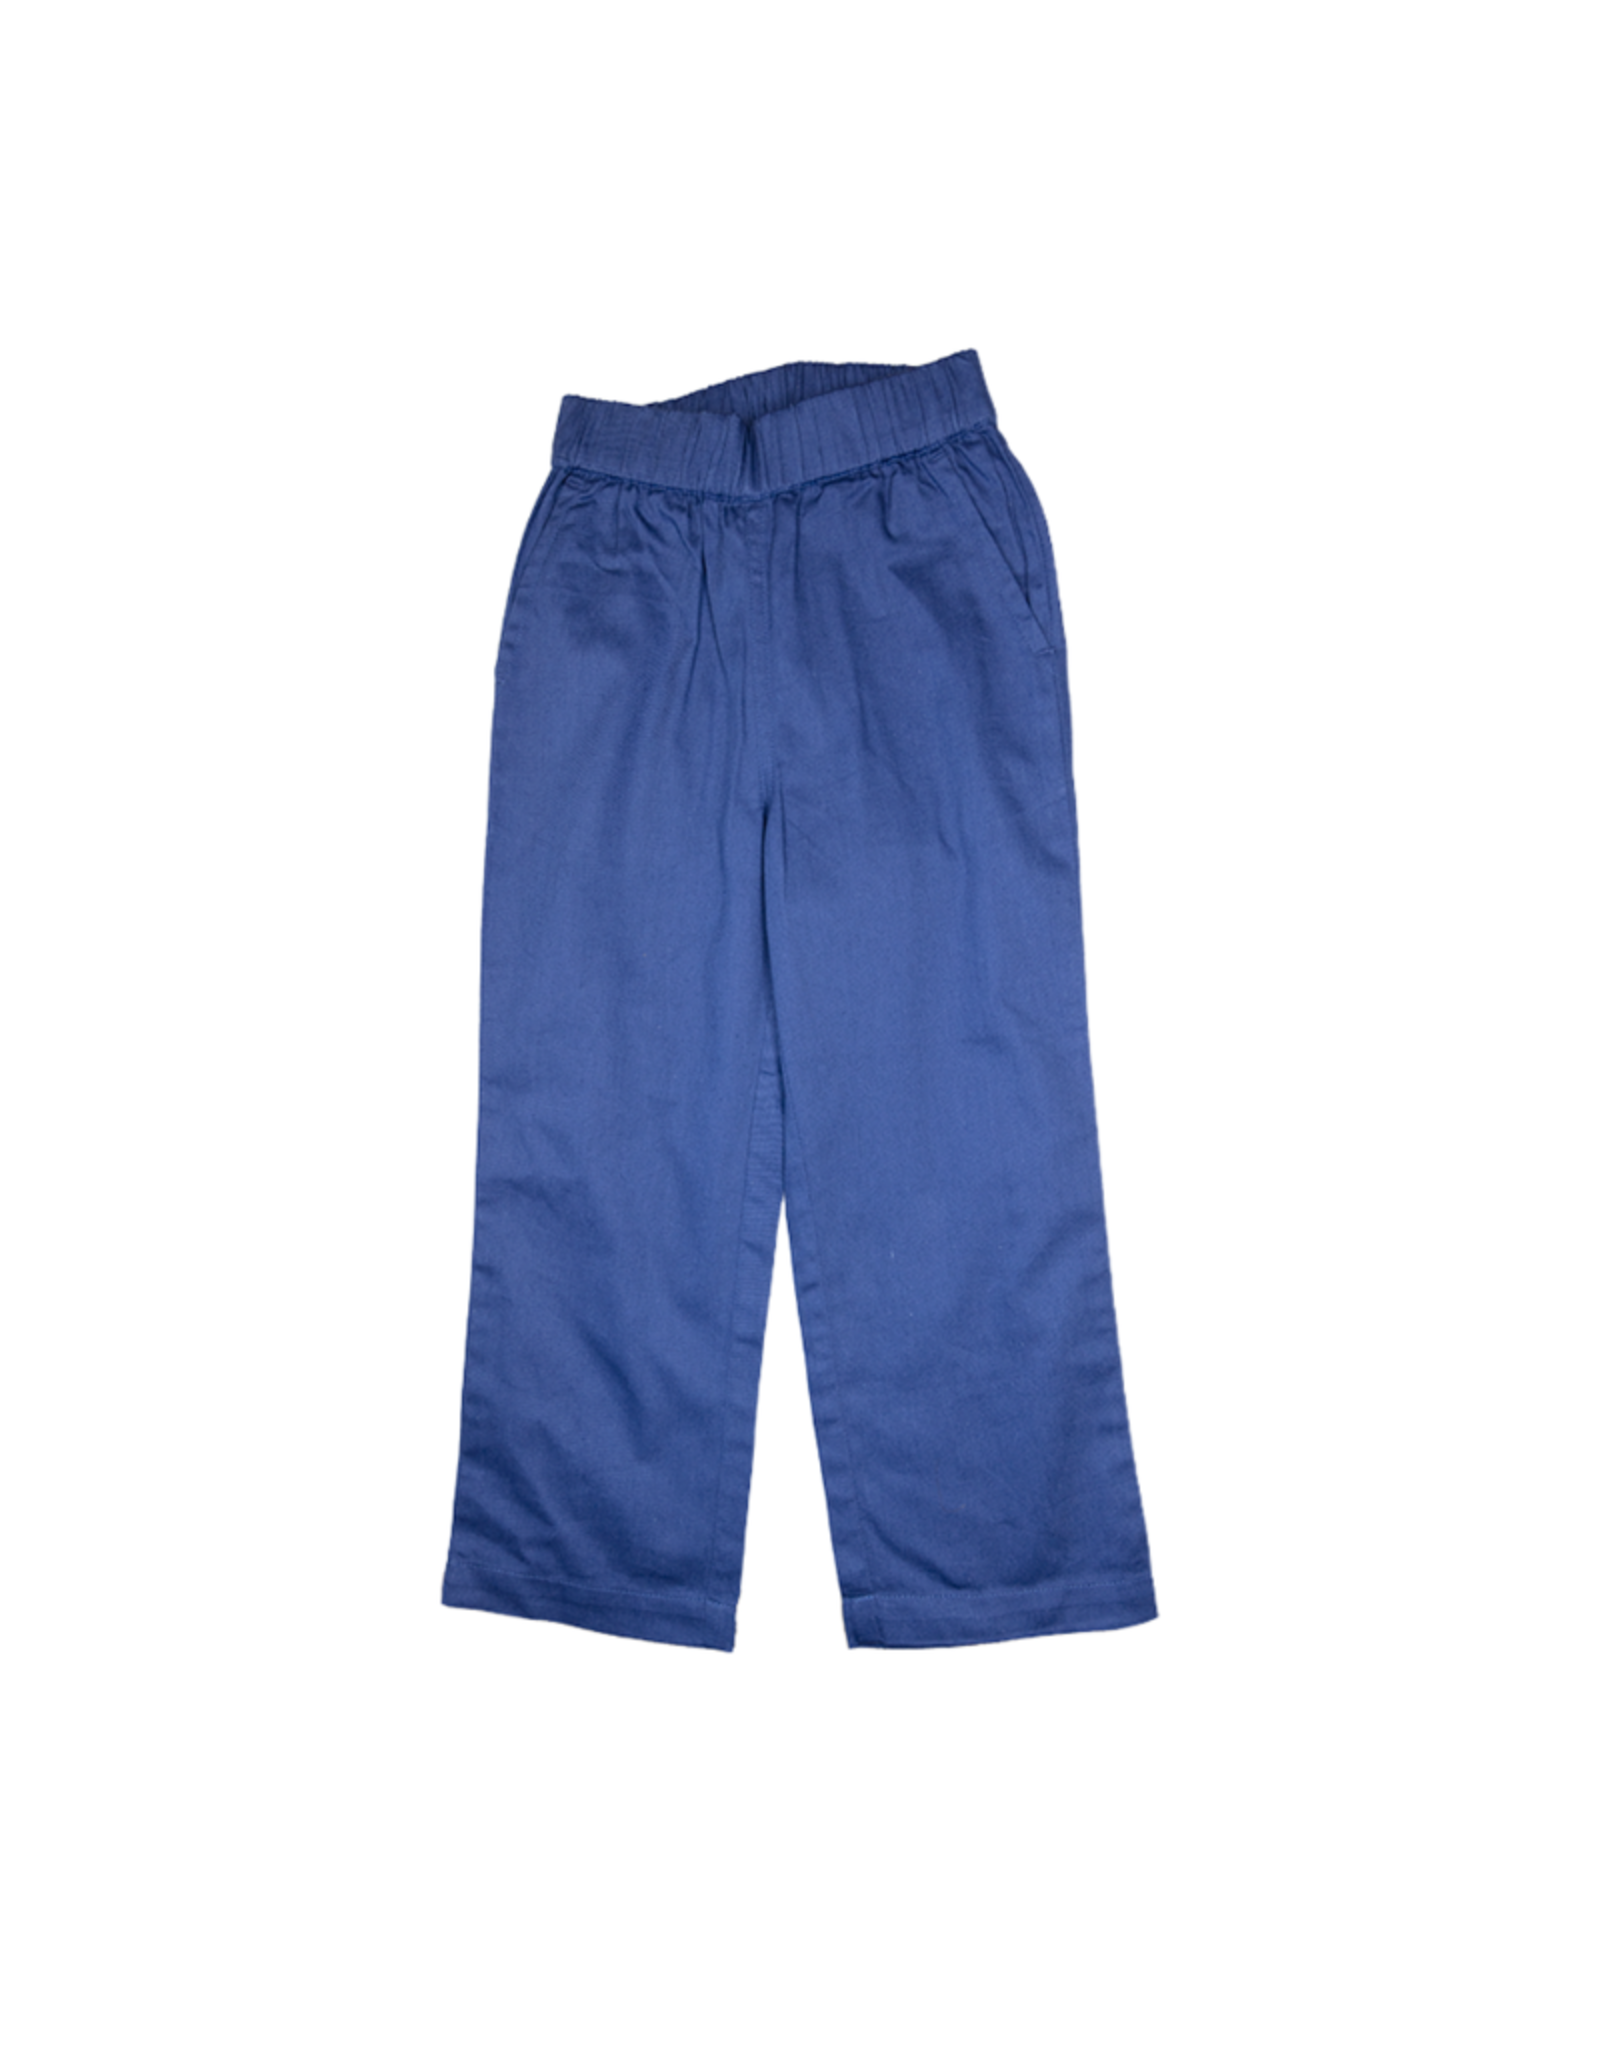 SouthBound SouthBound Navy Elastic Pants